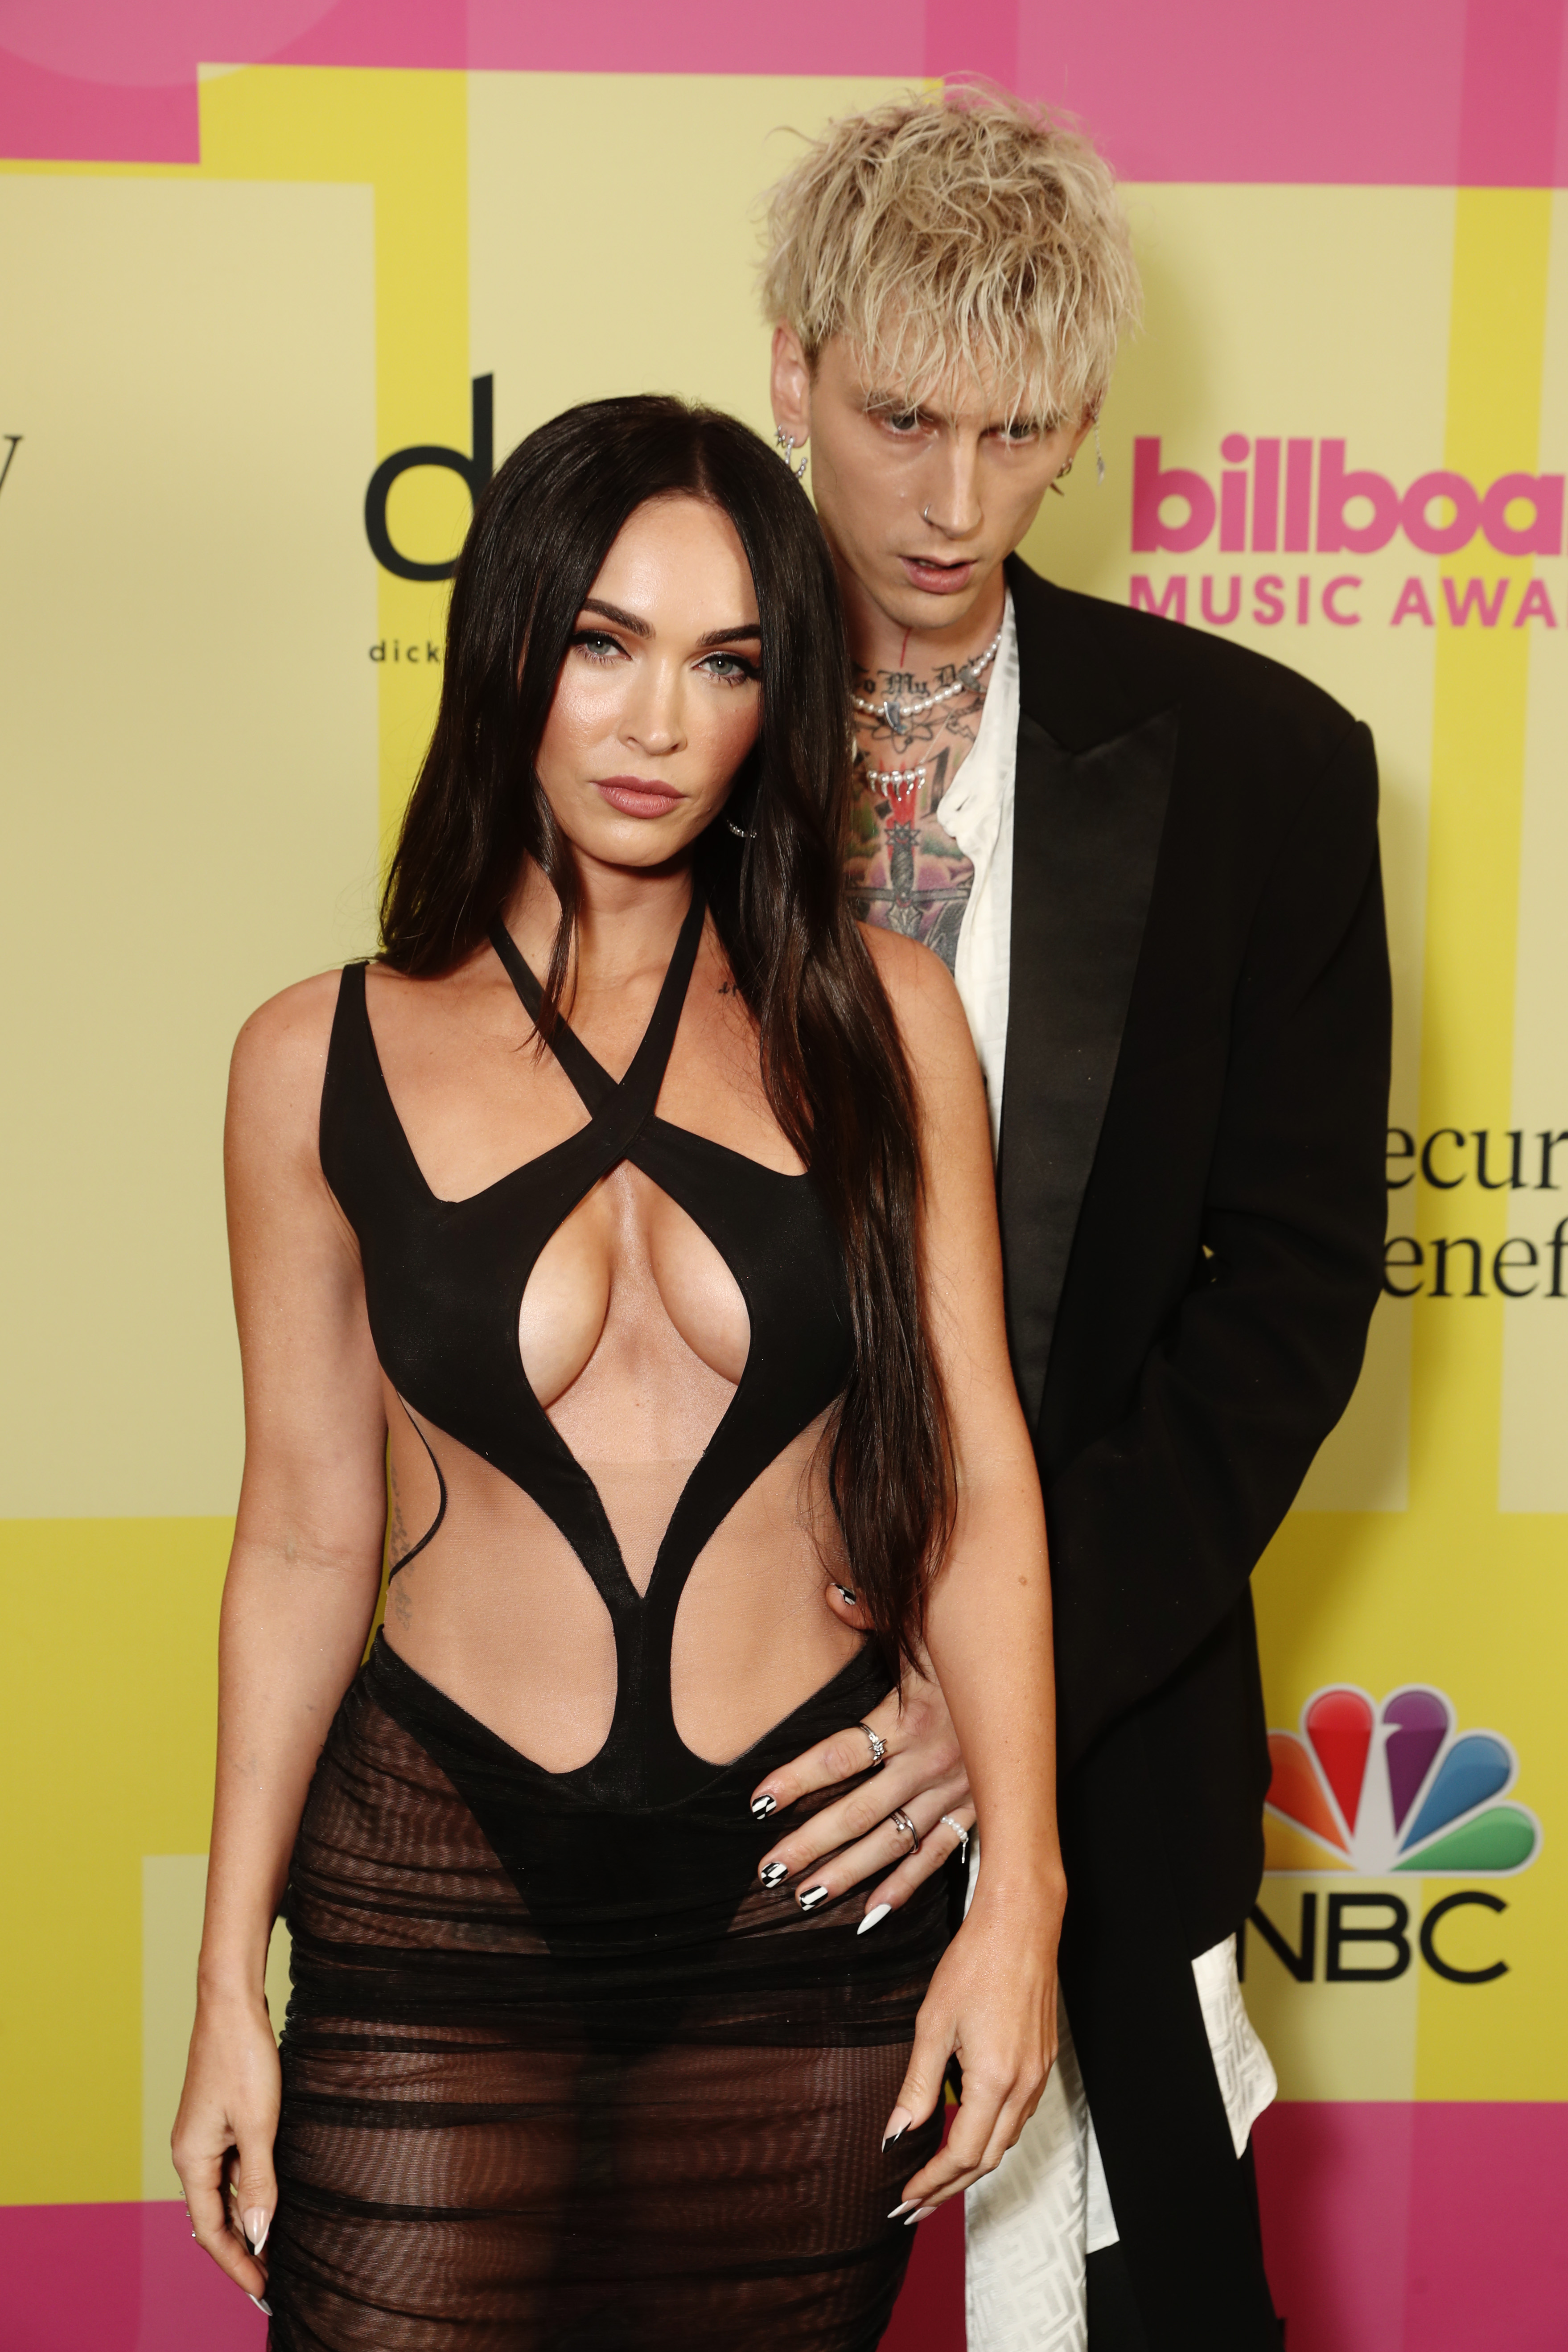 Megan Fox and Machine Gun Kelly on May 23, 2021, in Los Angeles, California. | Source: Getty Images